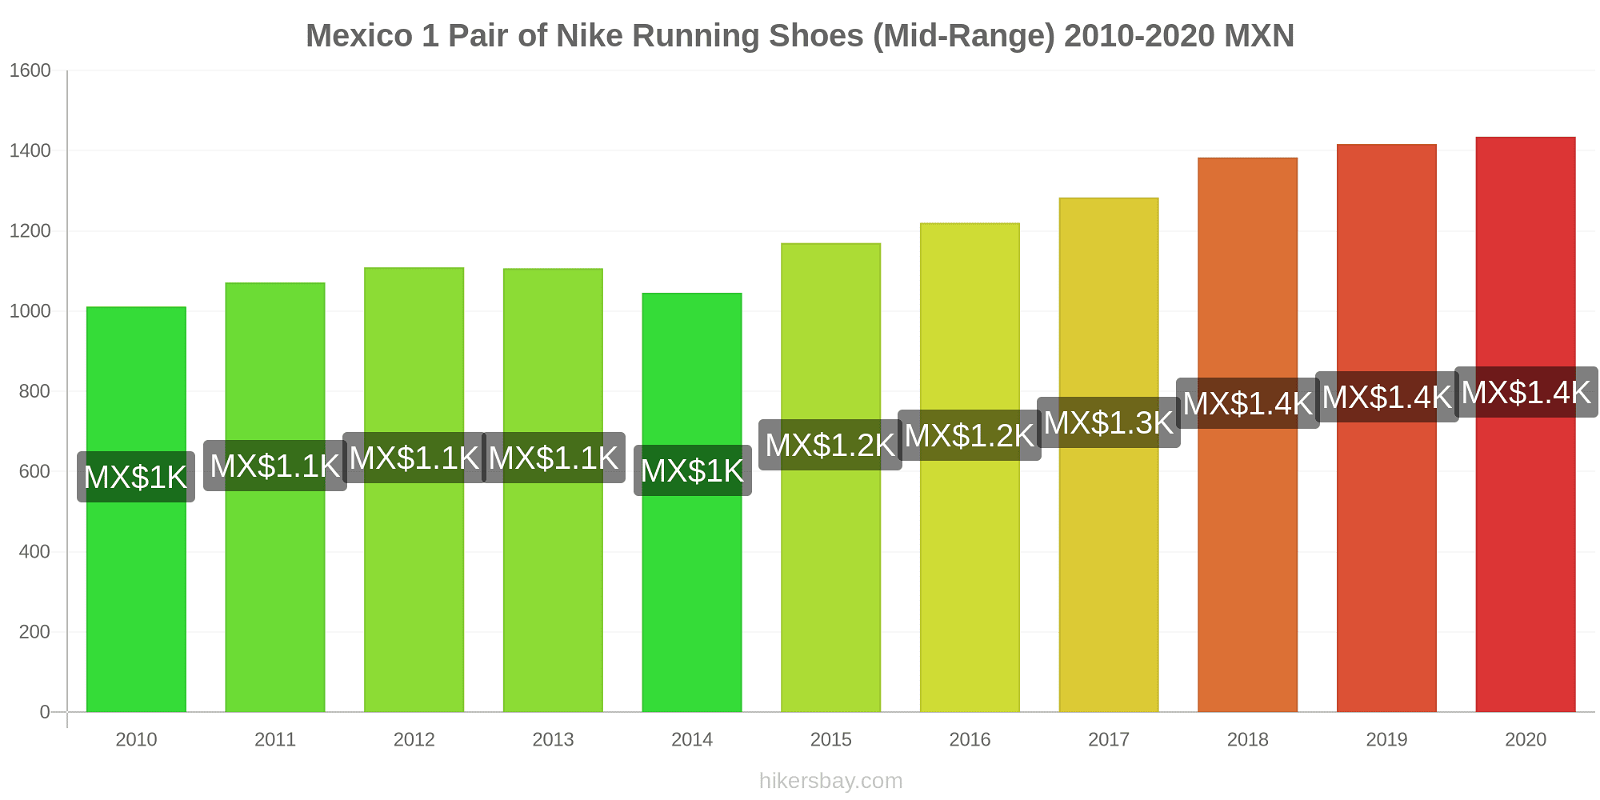 Mexico price changes 1 Pair of Nike Running Shoes (Mid-Range) hikersbay.com